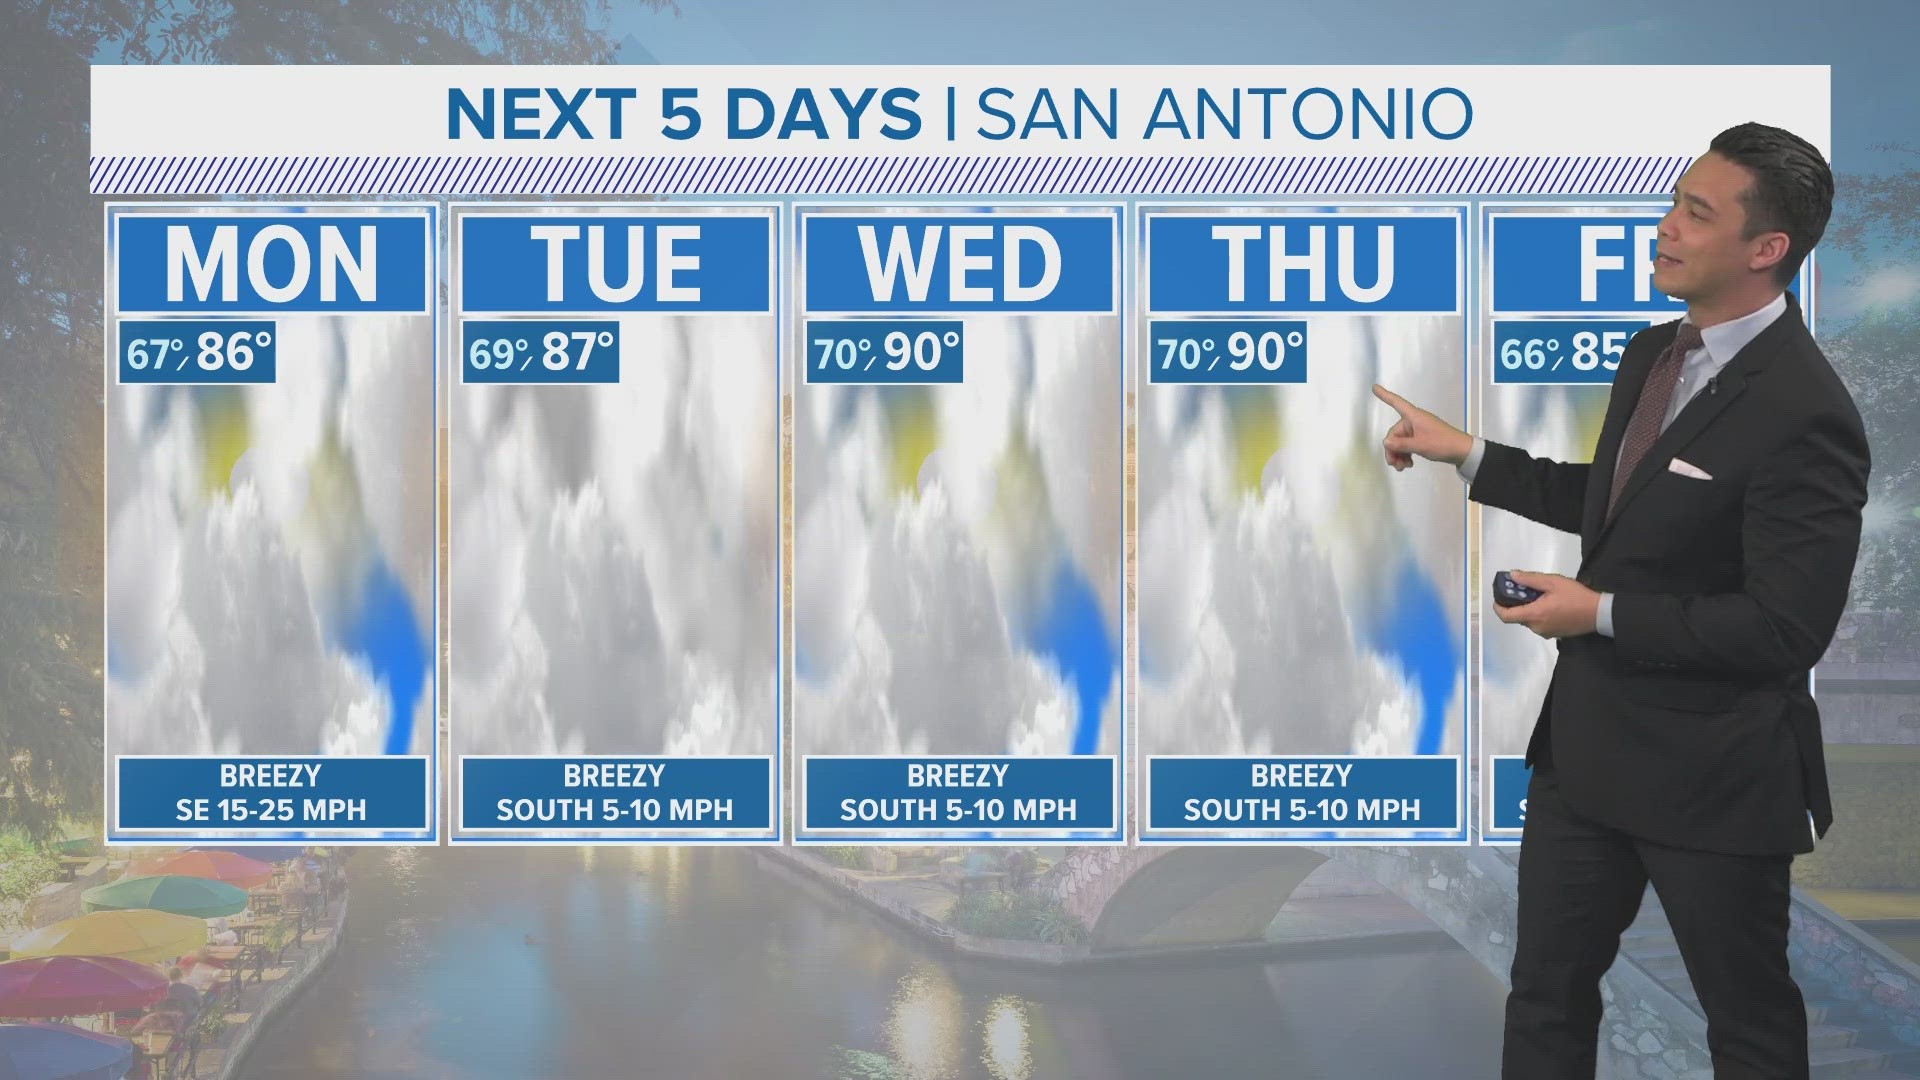 Temperatures will get up to the 90s Wednesday and Thursday, rain chances return over the weekend.